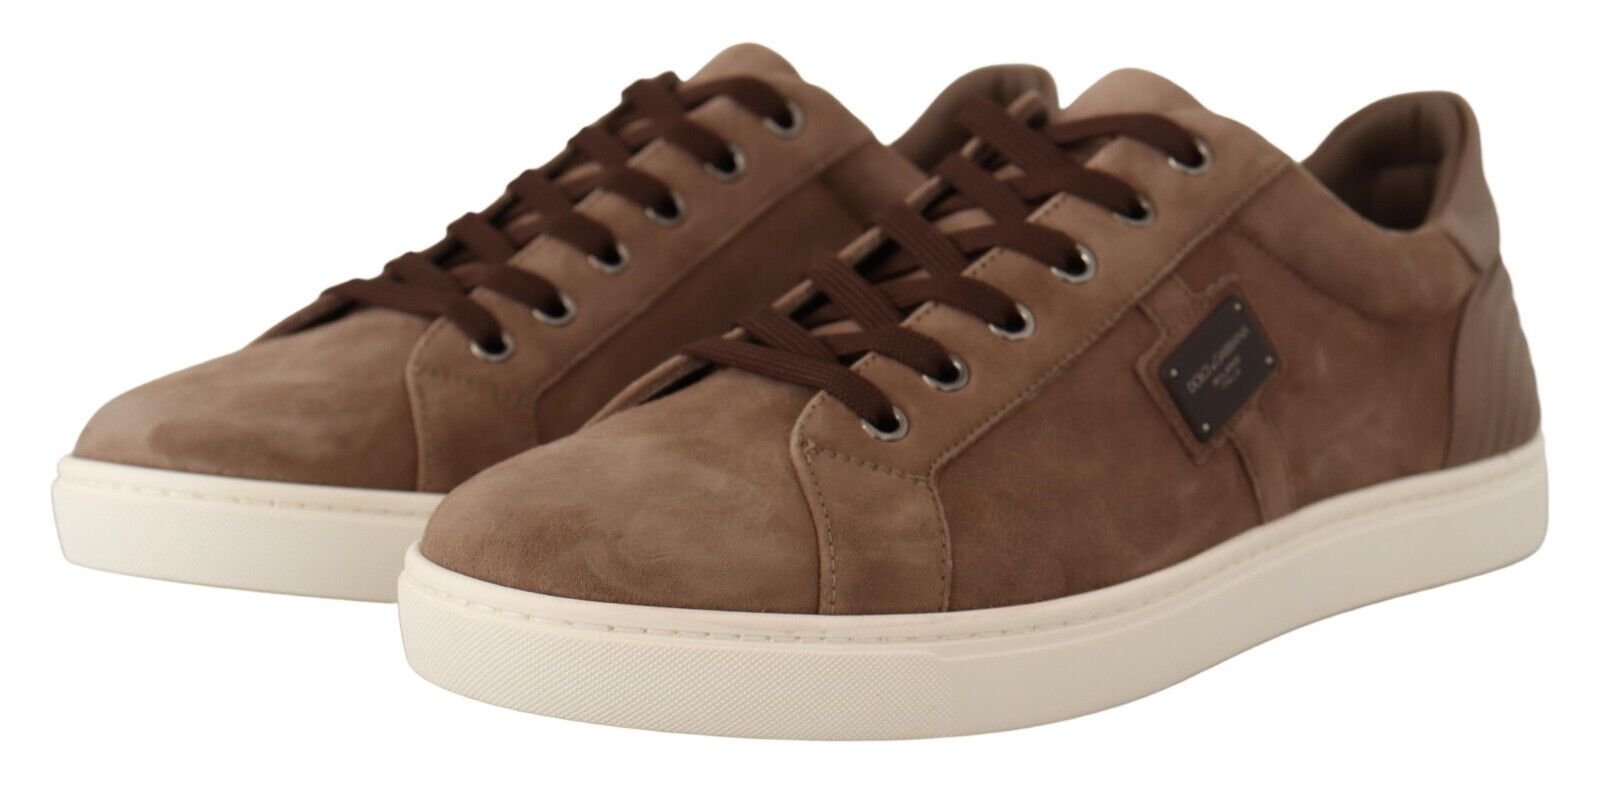 Dolce & Gabbana Brown Suede Leather Sneakers Shoes | Fashionsarah.com